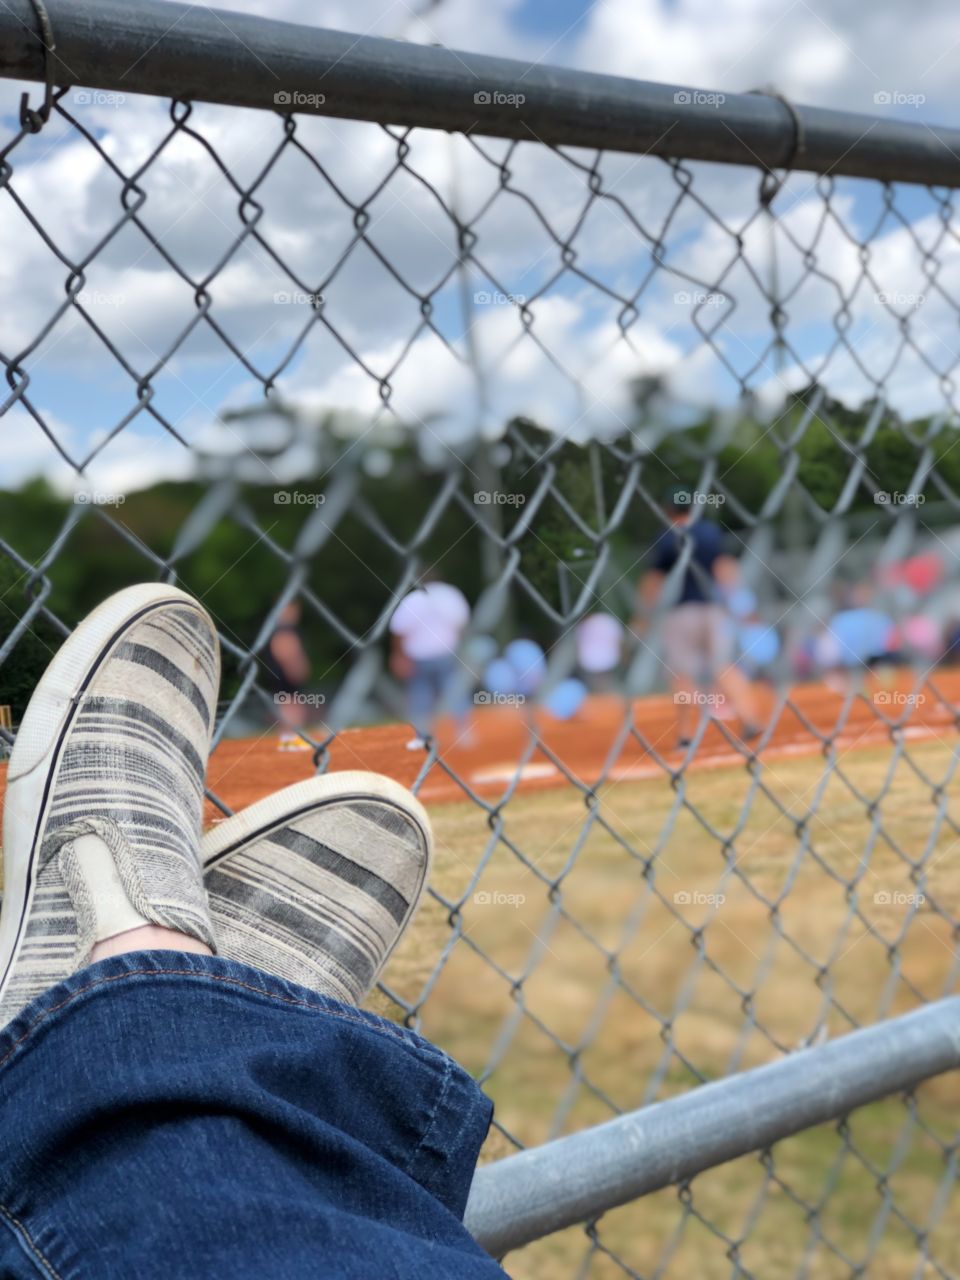 Wearing Mossimo Supply Co for comfort when relaxing at weekend T-ball